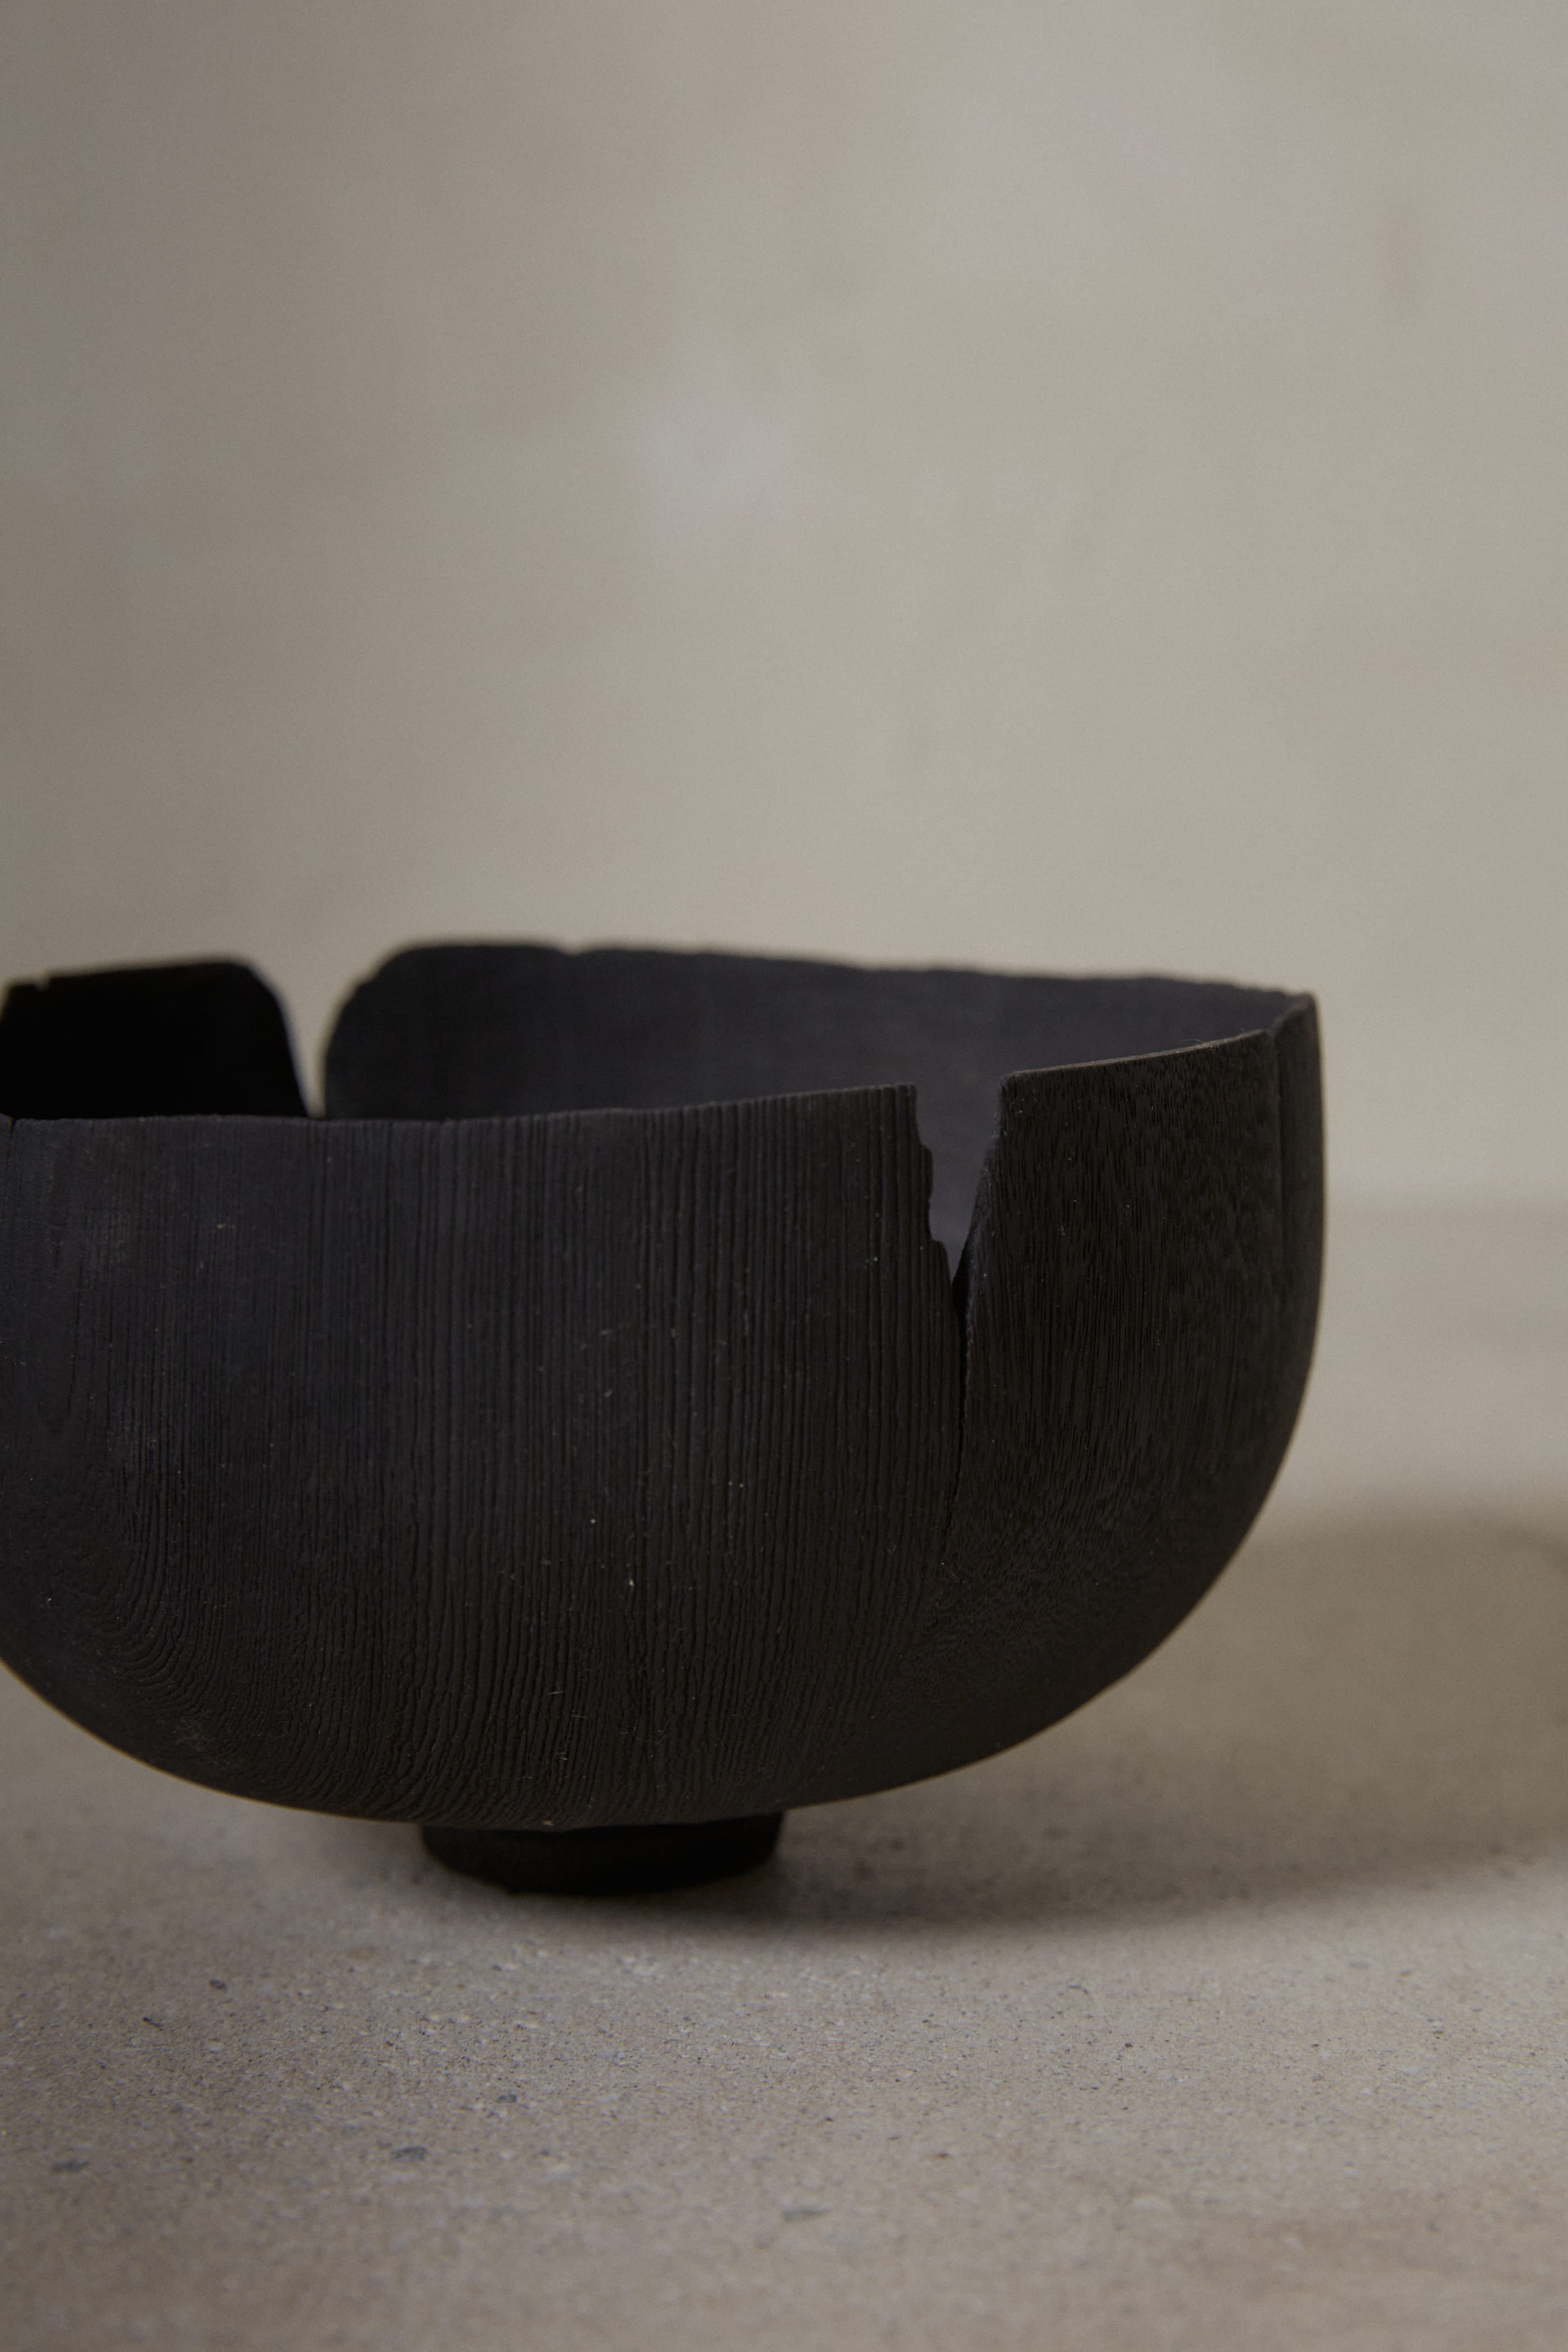 Raw edge wood details on footed black Yakisugi Bowl from CARMWORKS.